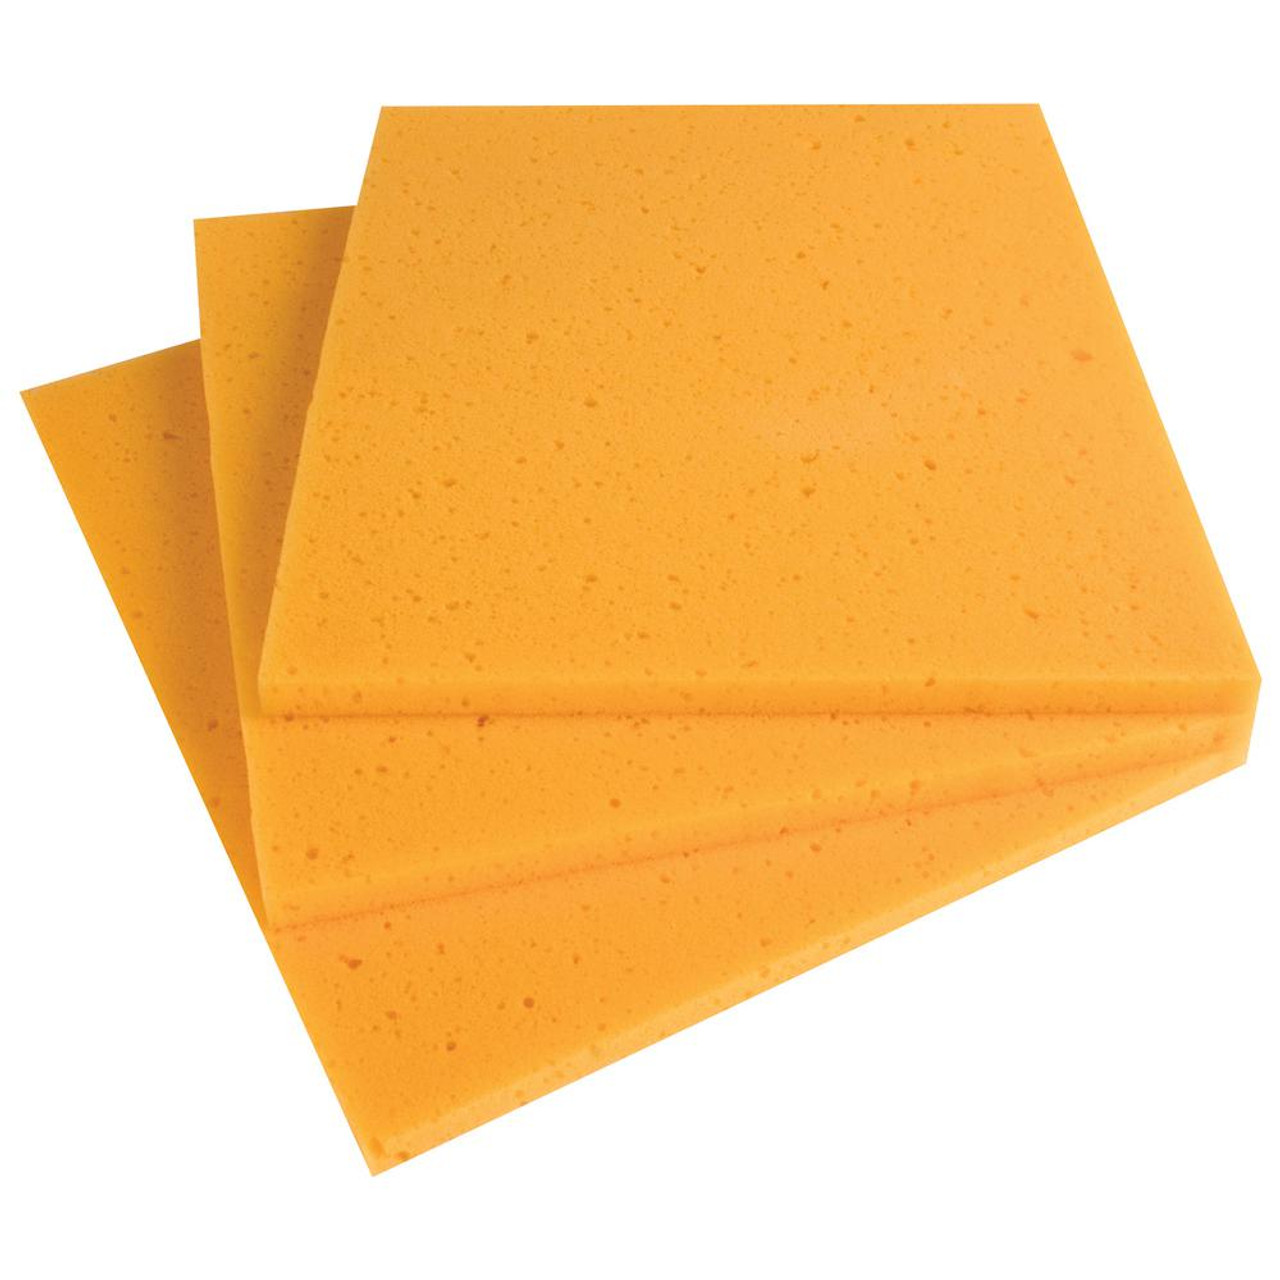 Pack of 3 Synthetic Silk Sponge Sheets -Big 12 x 10 x 1/2 Inch Size for  Painting, Arts & Crafts, Ceramics & Pottery, Stamping, Household Use & More!